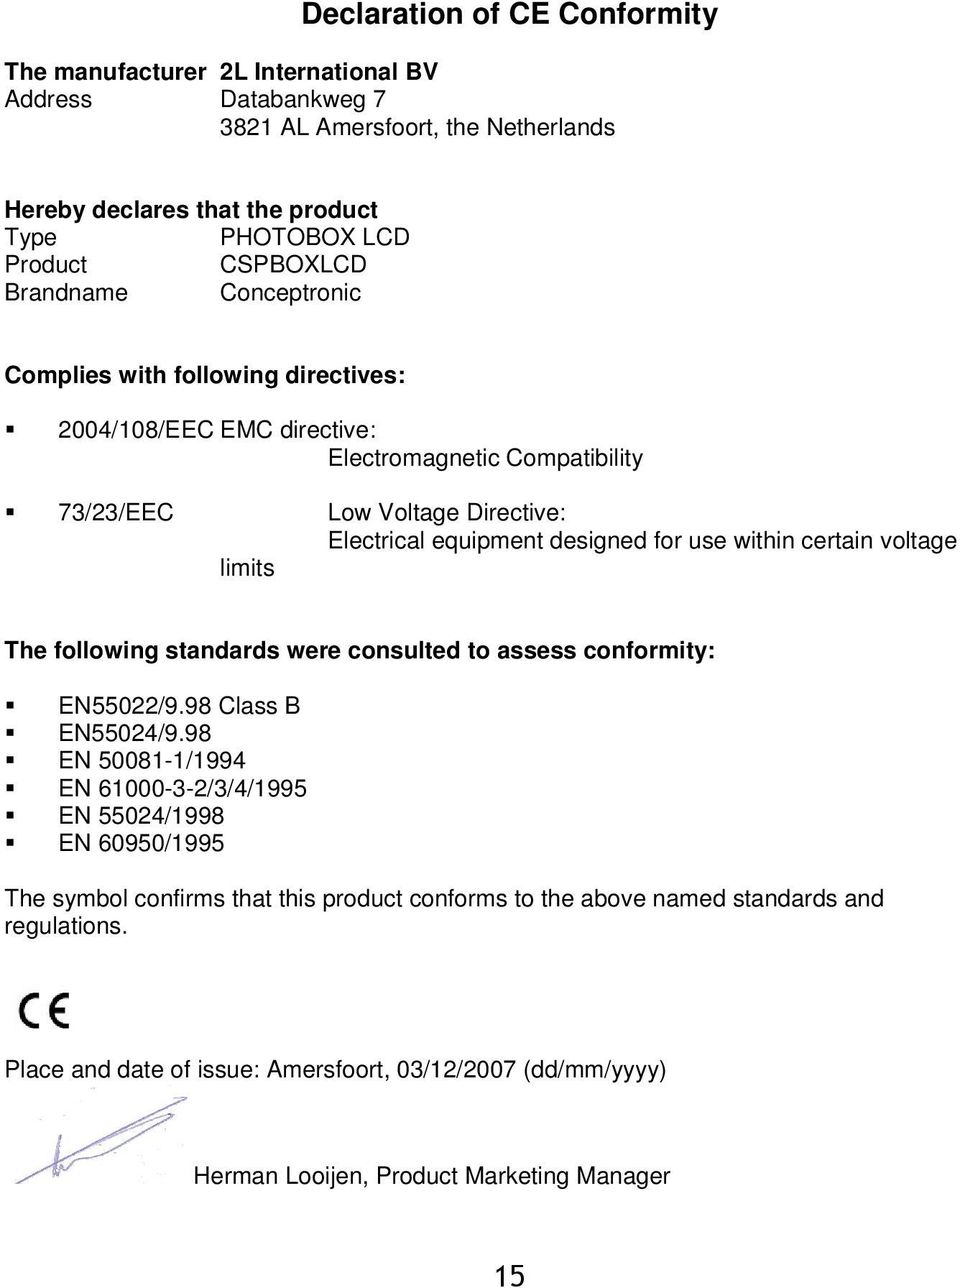 within certain voltage limits The following standards were consulted to assess conformity: EN55022/9.98 Class B EN55024/9.